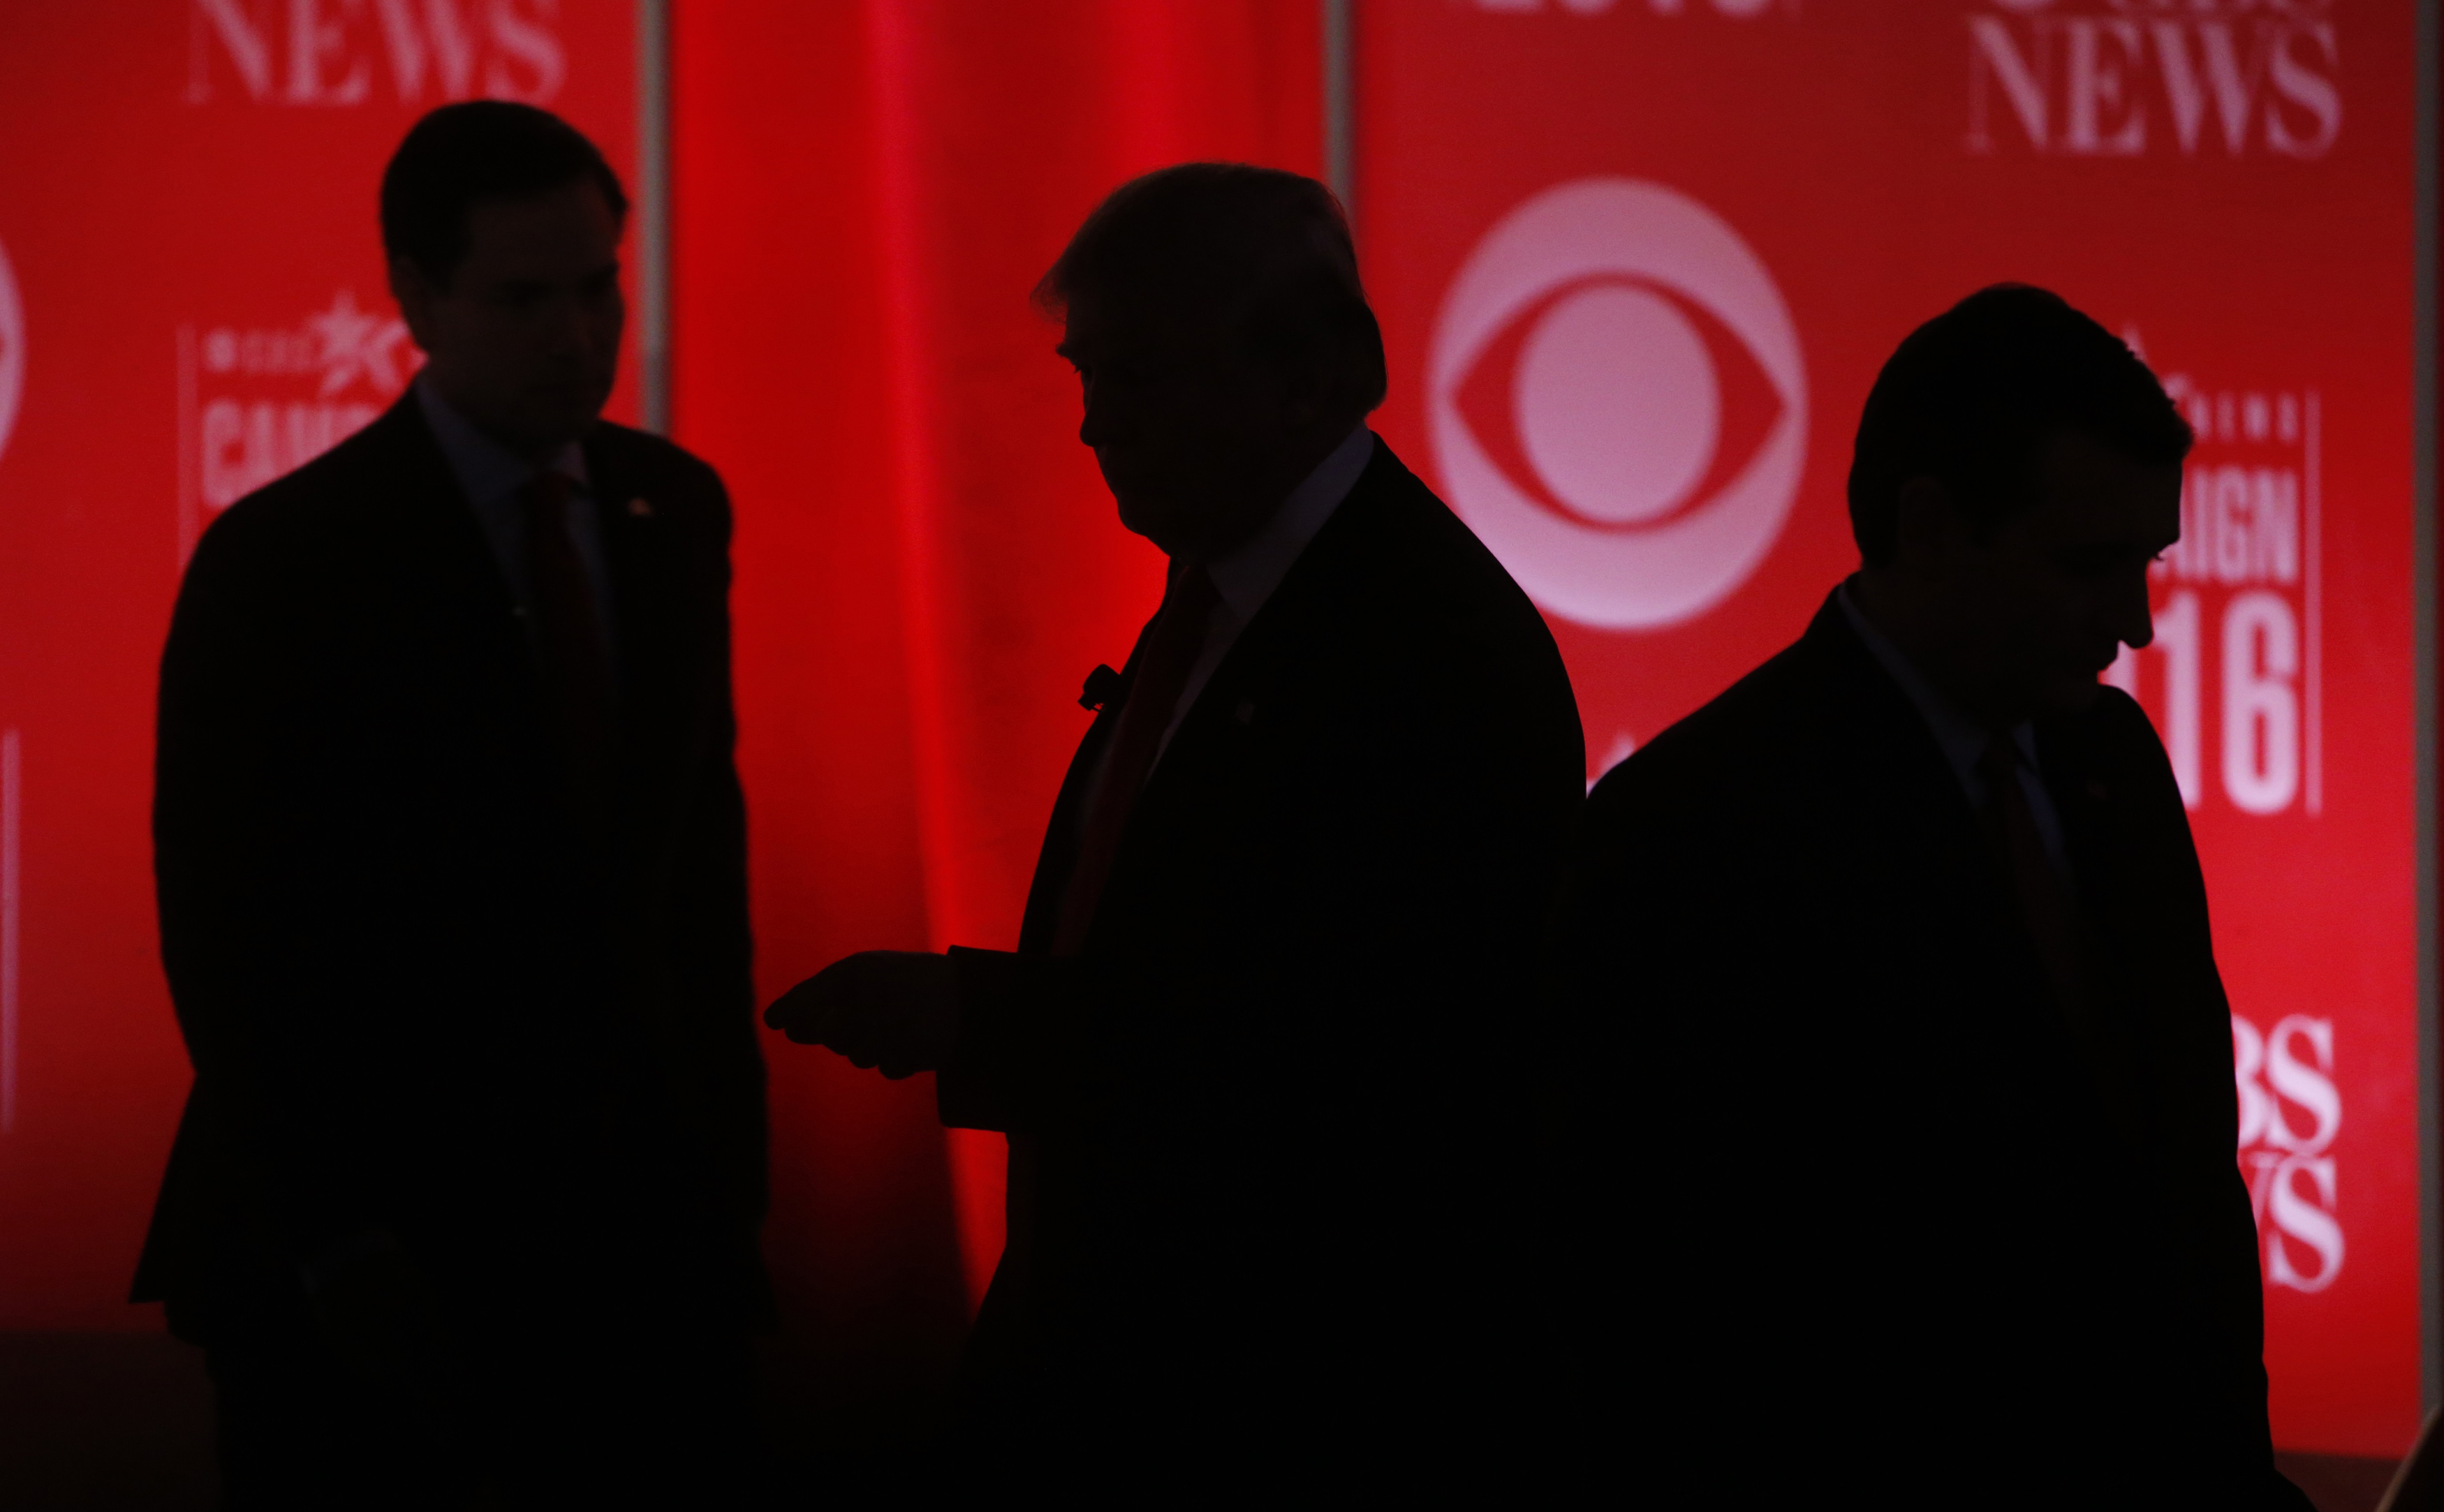 Republican U.S. presidential candidates (L-R) Senator Marco Rubio, businessman Donald Trump and Senator Ted Cruz walk the stage during a commercial break at the Republican U.S. presidential candidates debate sponsored by CBS News and the Republican National Committee in Greenville, South Carolina February 13, 2016. REUTERS/Jonathan Ernst (TPX IMAGES OF THE DAY) - RTX26TRH